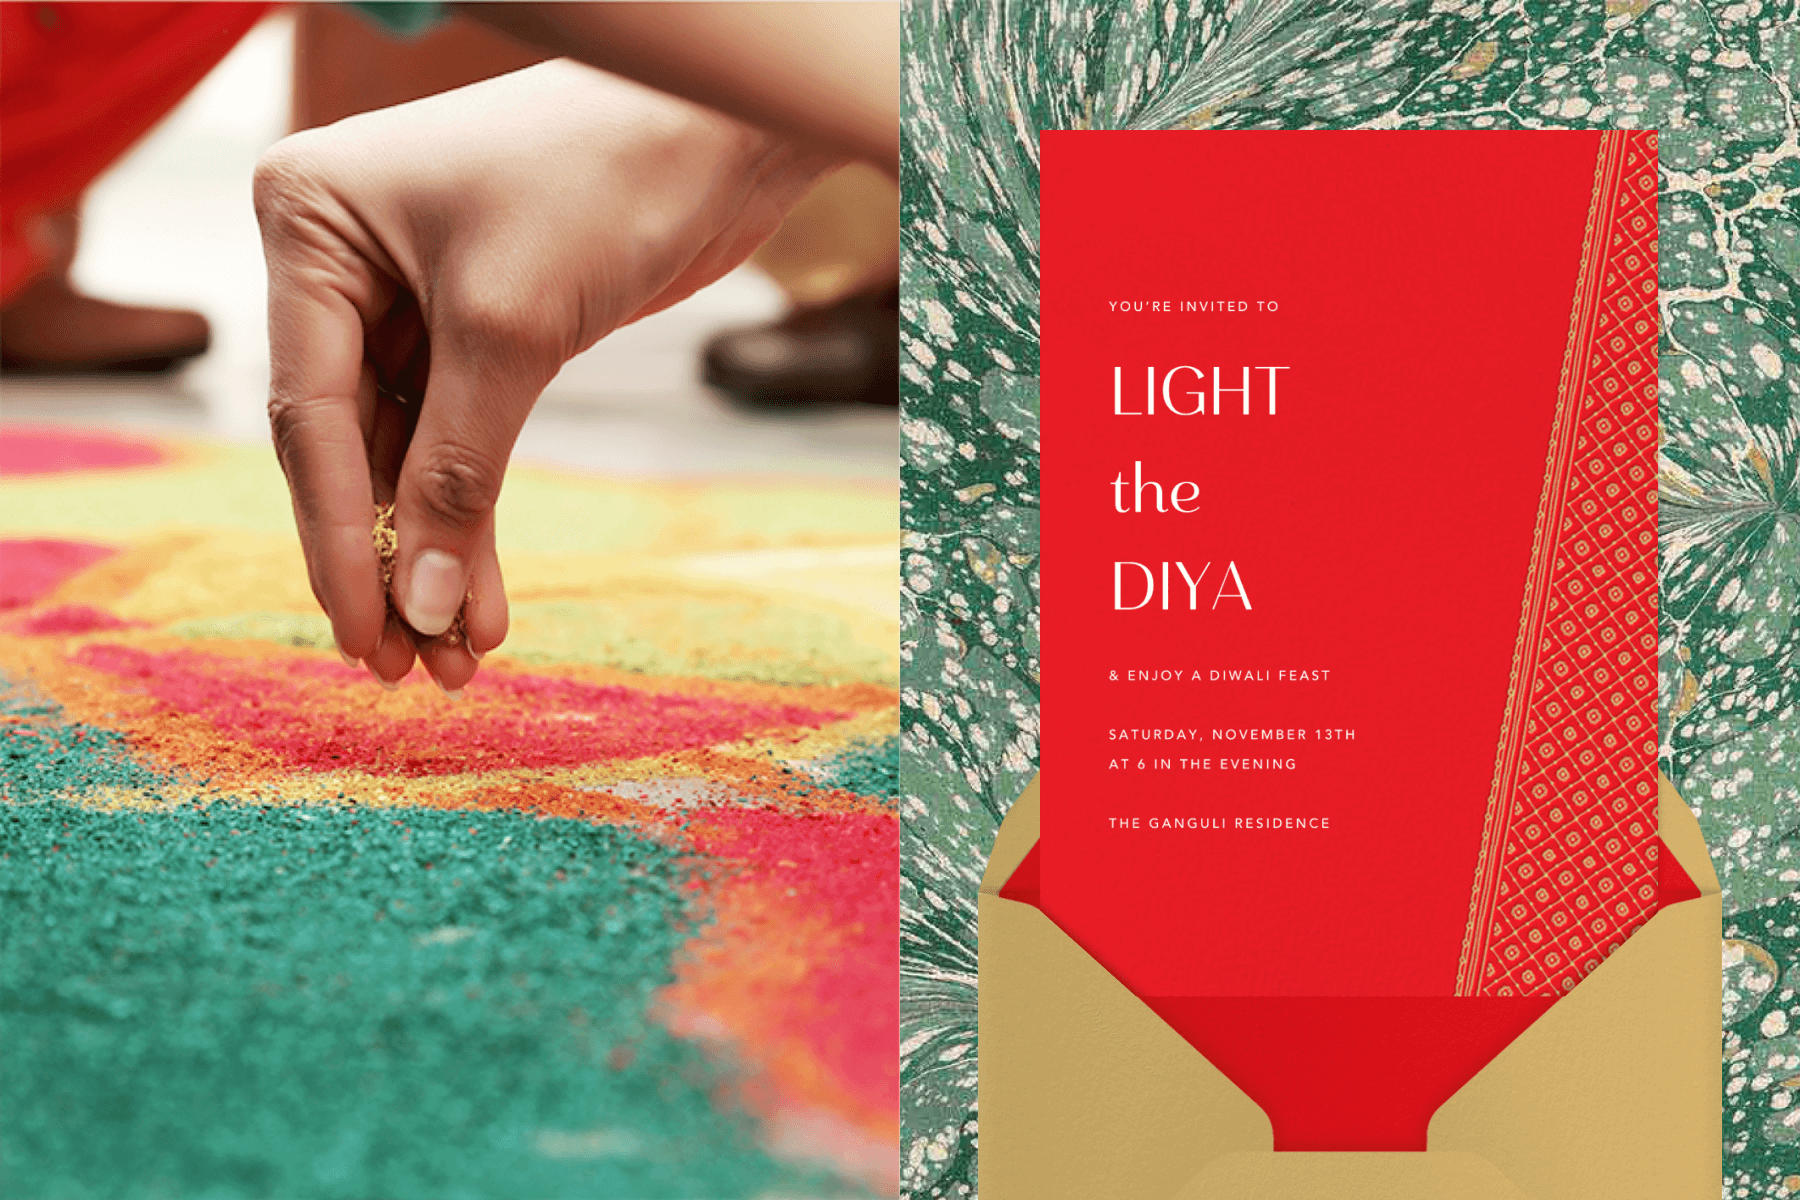 Left: A close up of a hand pouring colorful sand art. Right: A red Diwali invitation featuring a subtle geometric design.